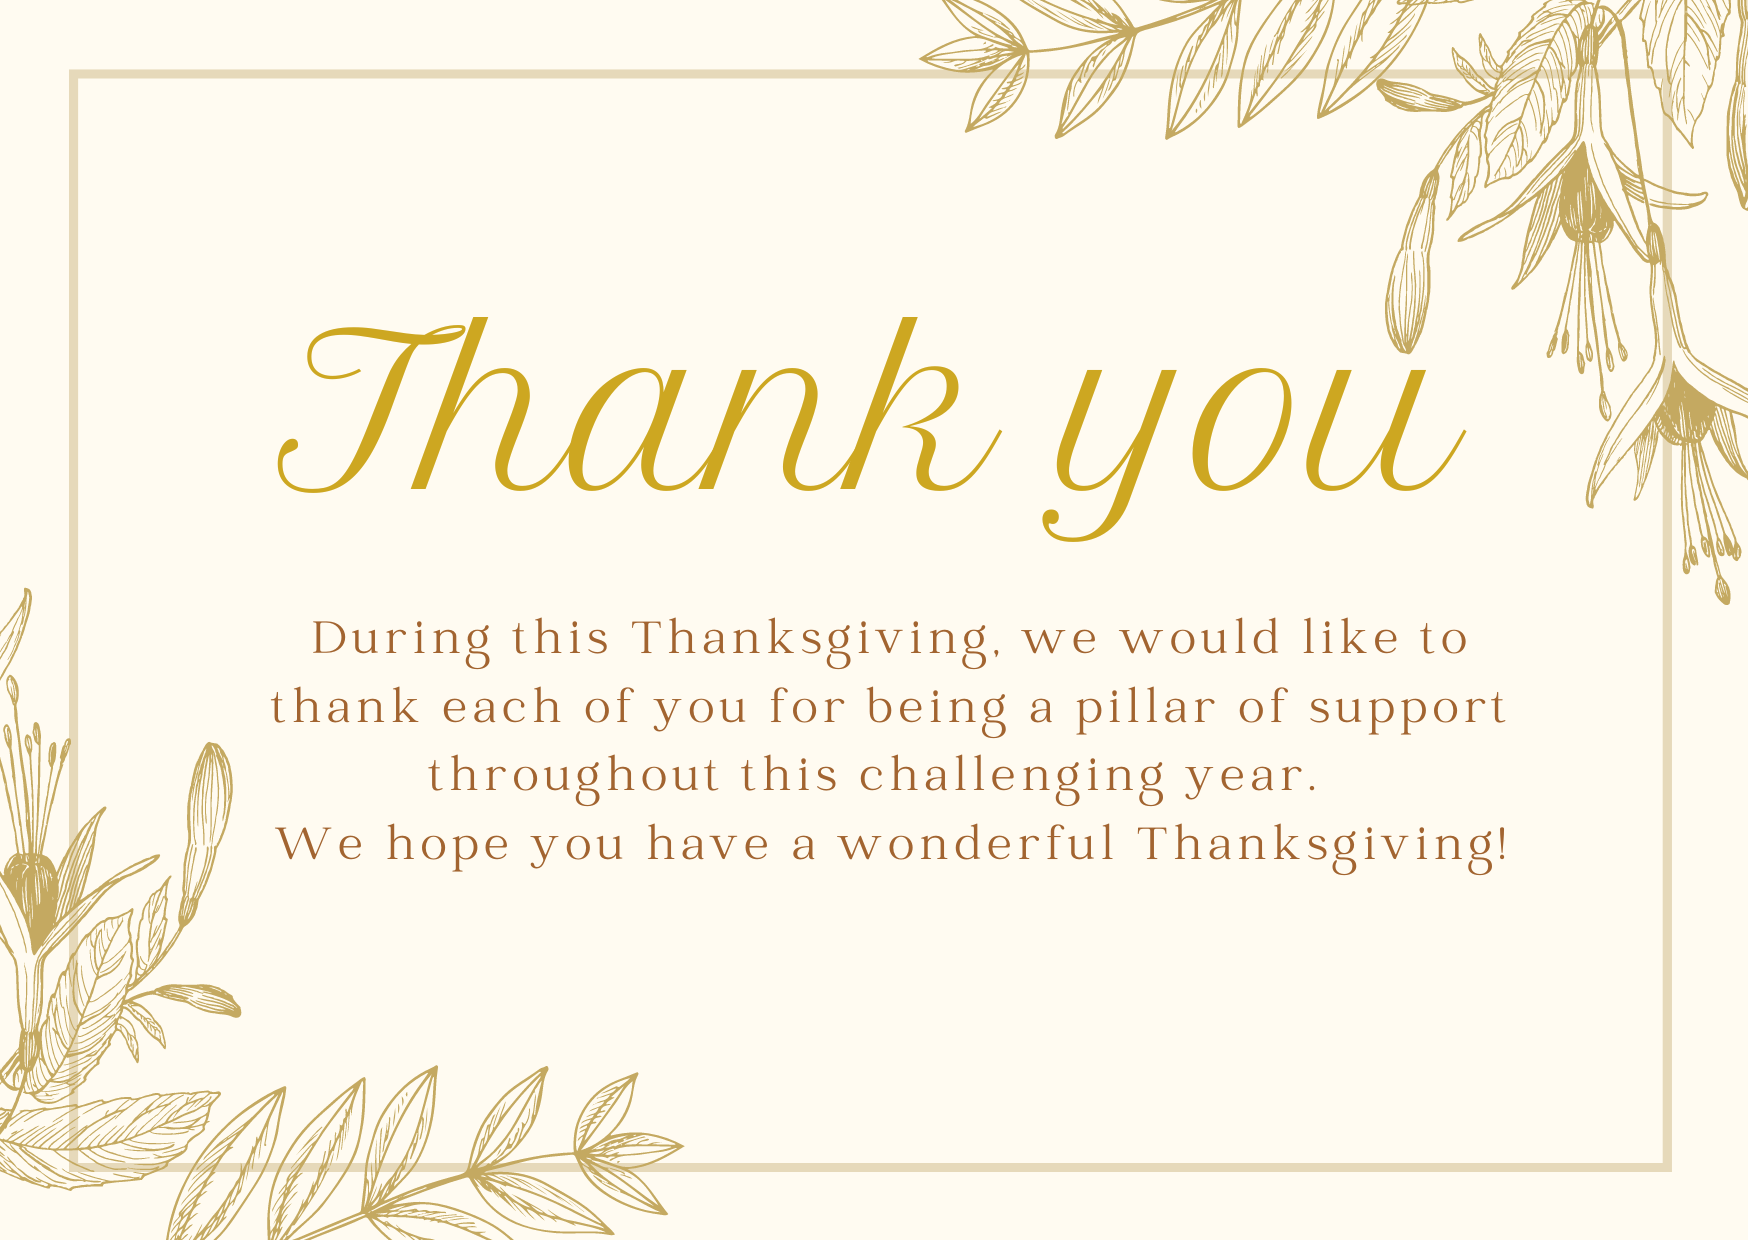 ThankGiving Card for your Employees